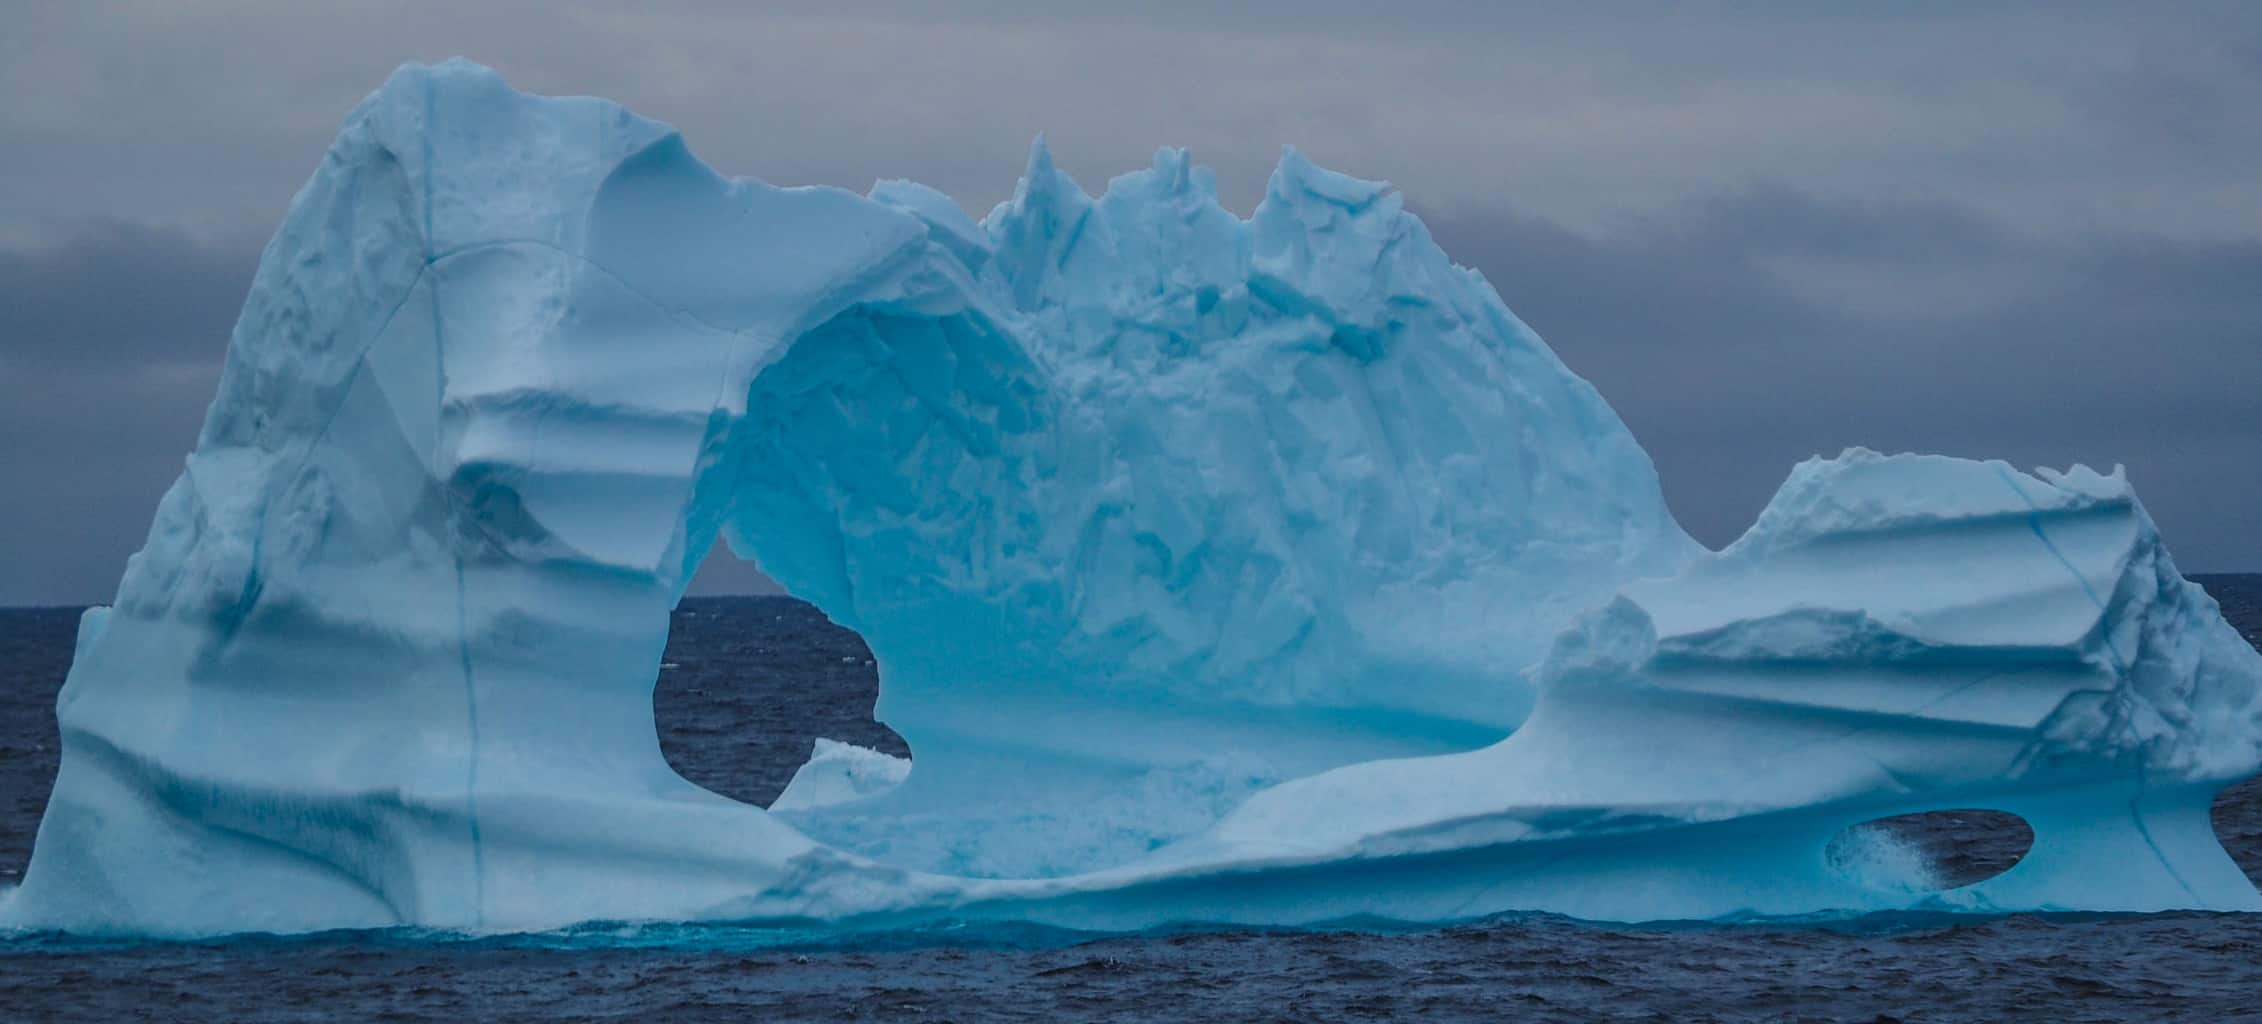 One of many thousands of icebergs floating around the waters in Greenland